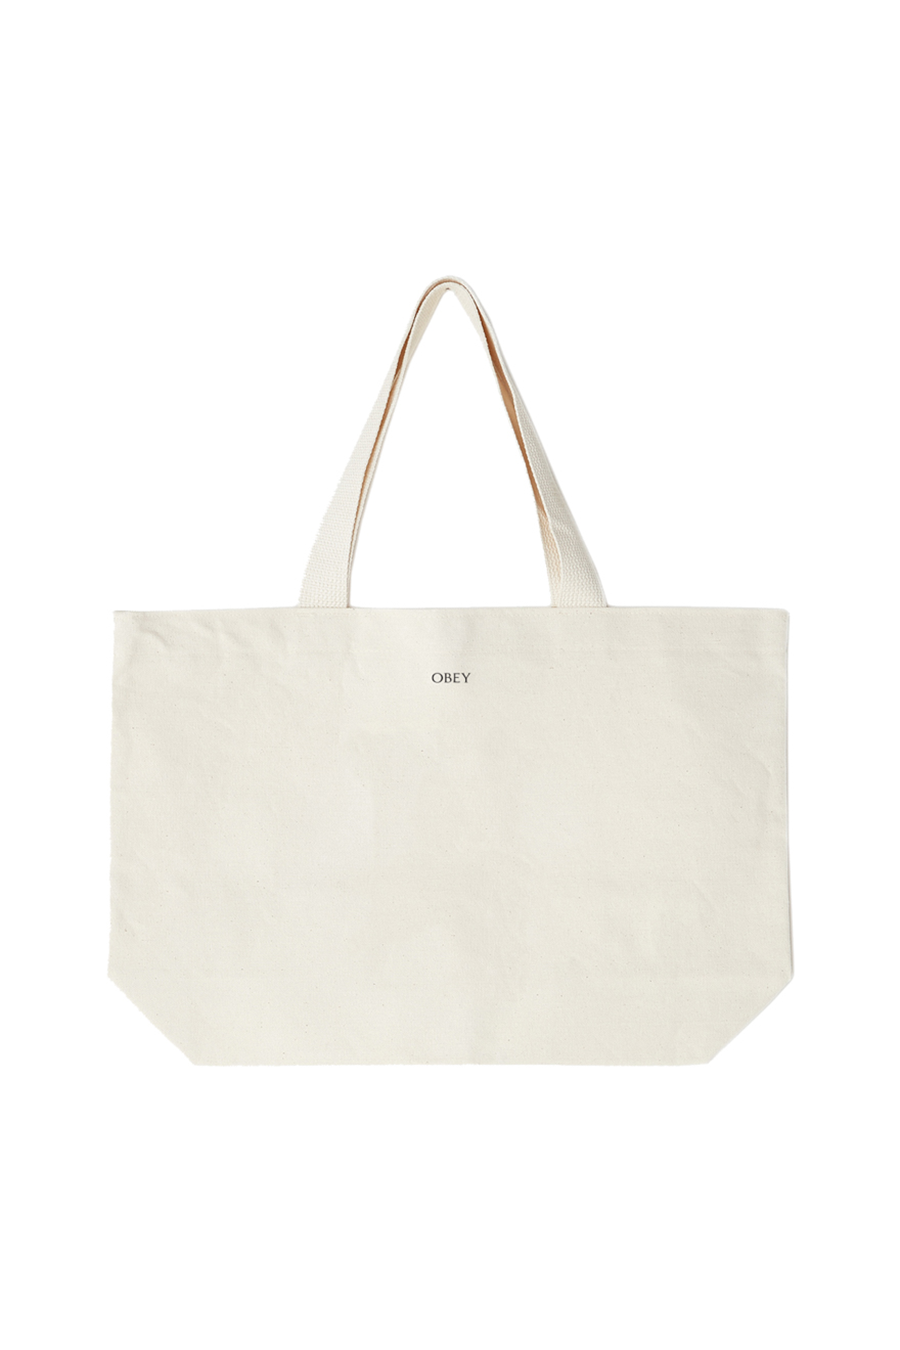 Obey Radical Peace Tote | Natural - Main Image Number 2 of 2